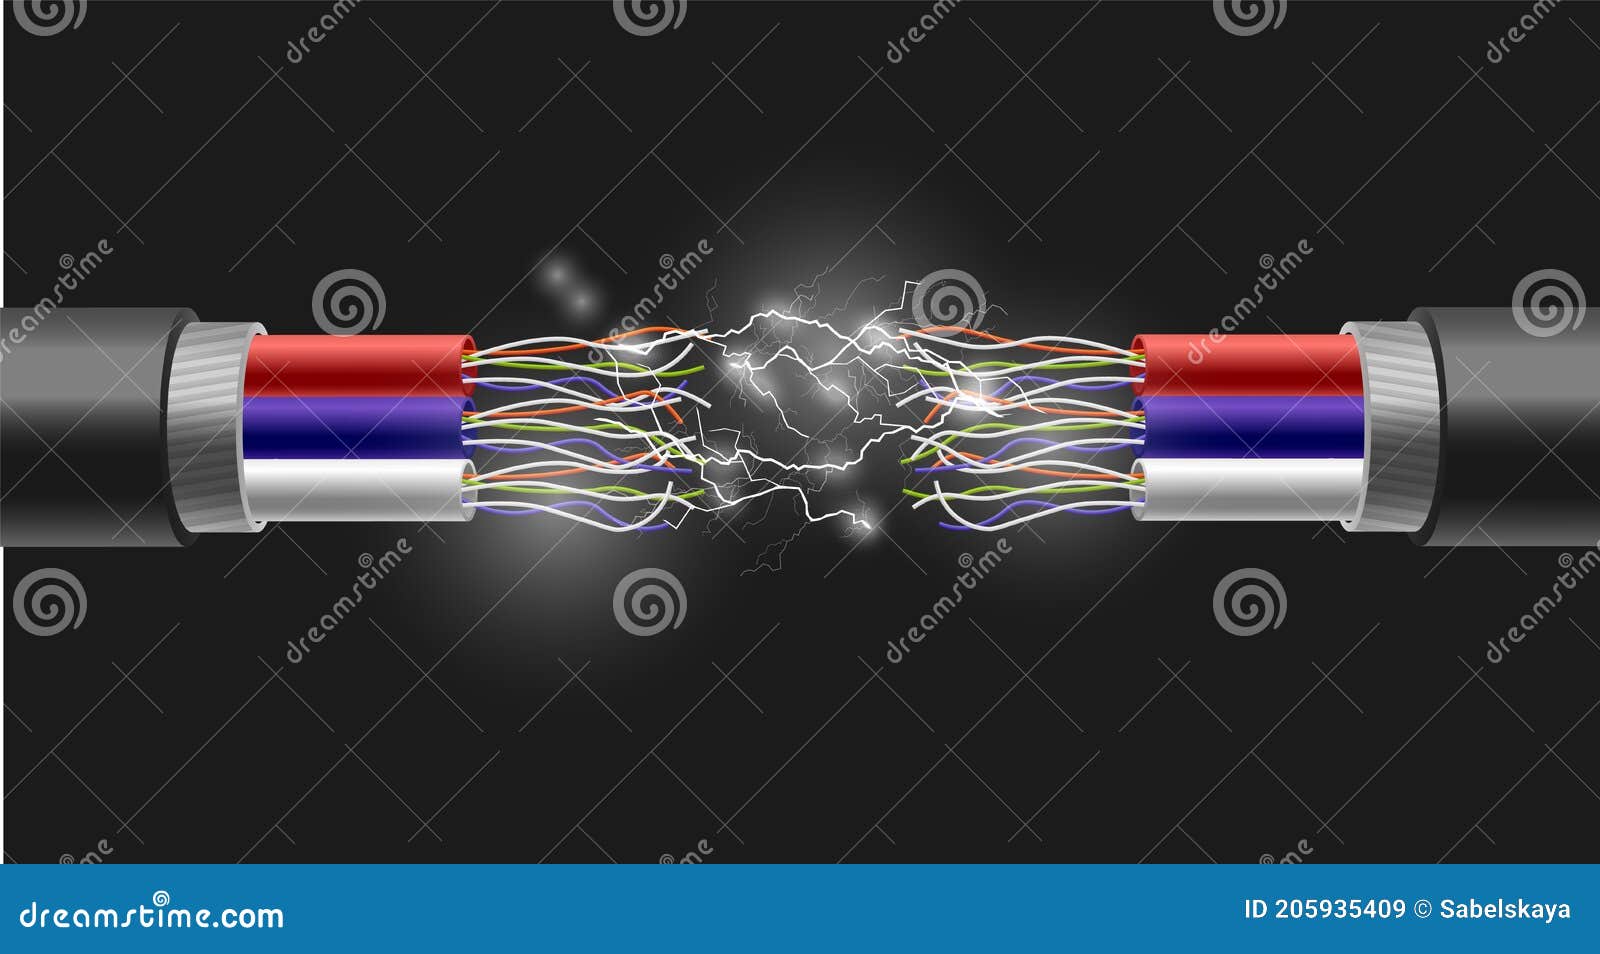 Exposed Wires Stock Illustrations – 57 Exposed Wires Stock Illustrations,  Vectors & Clipart - Dreamstime